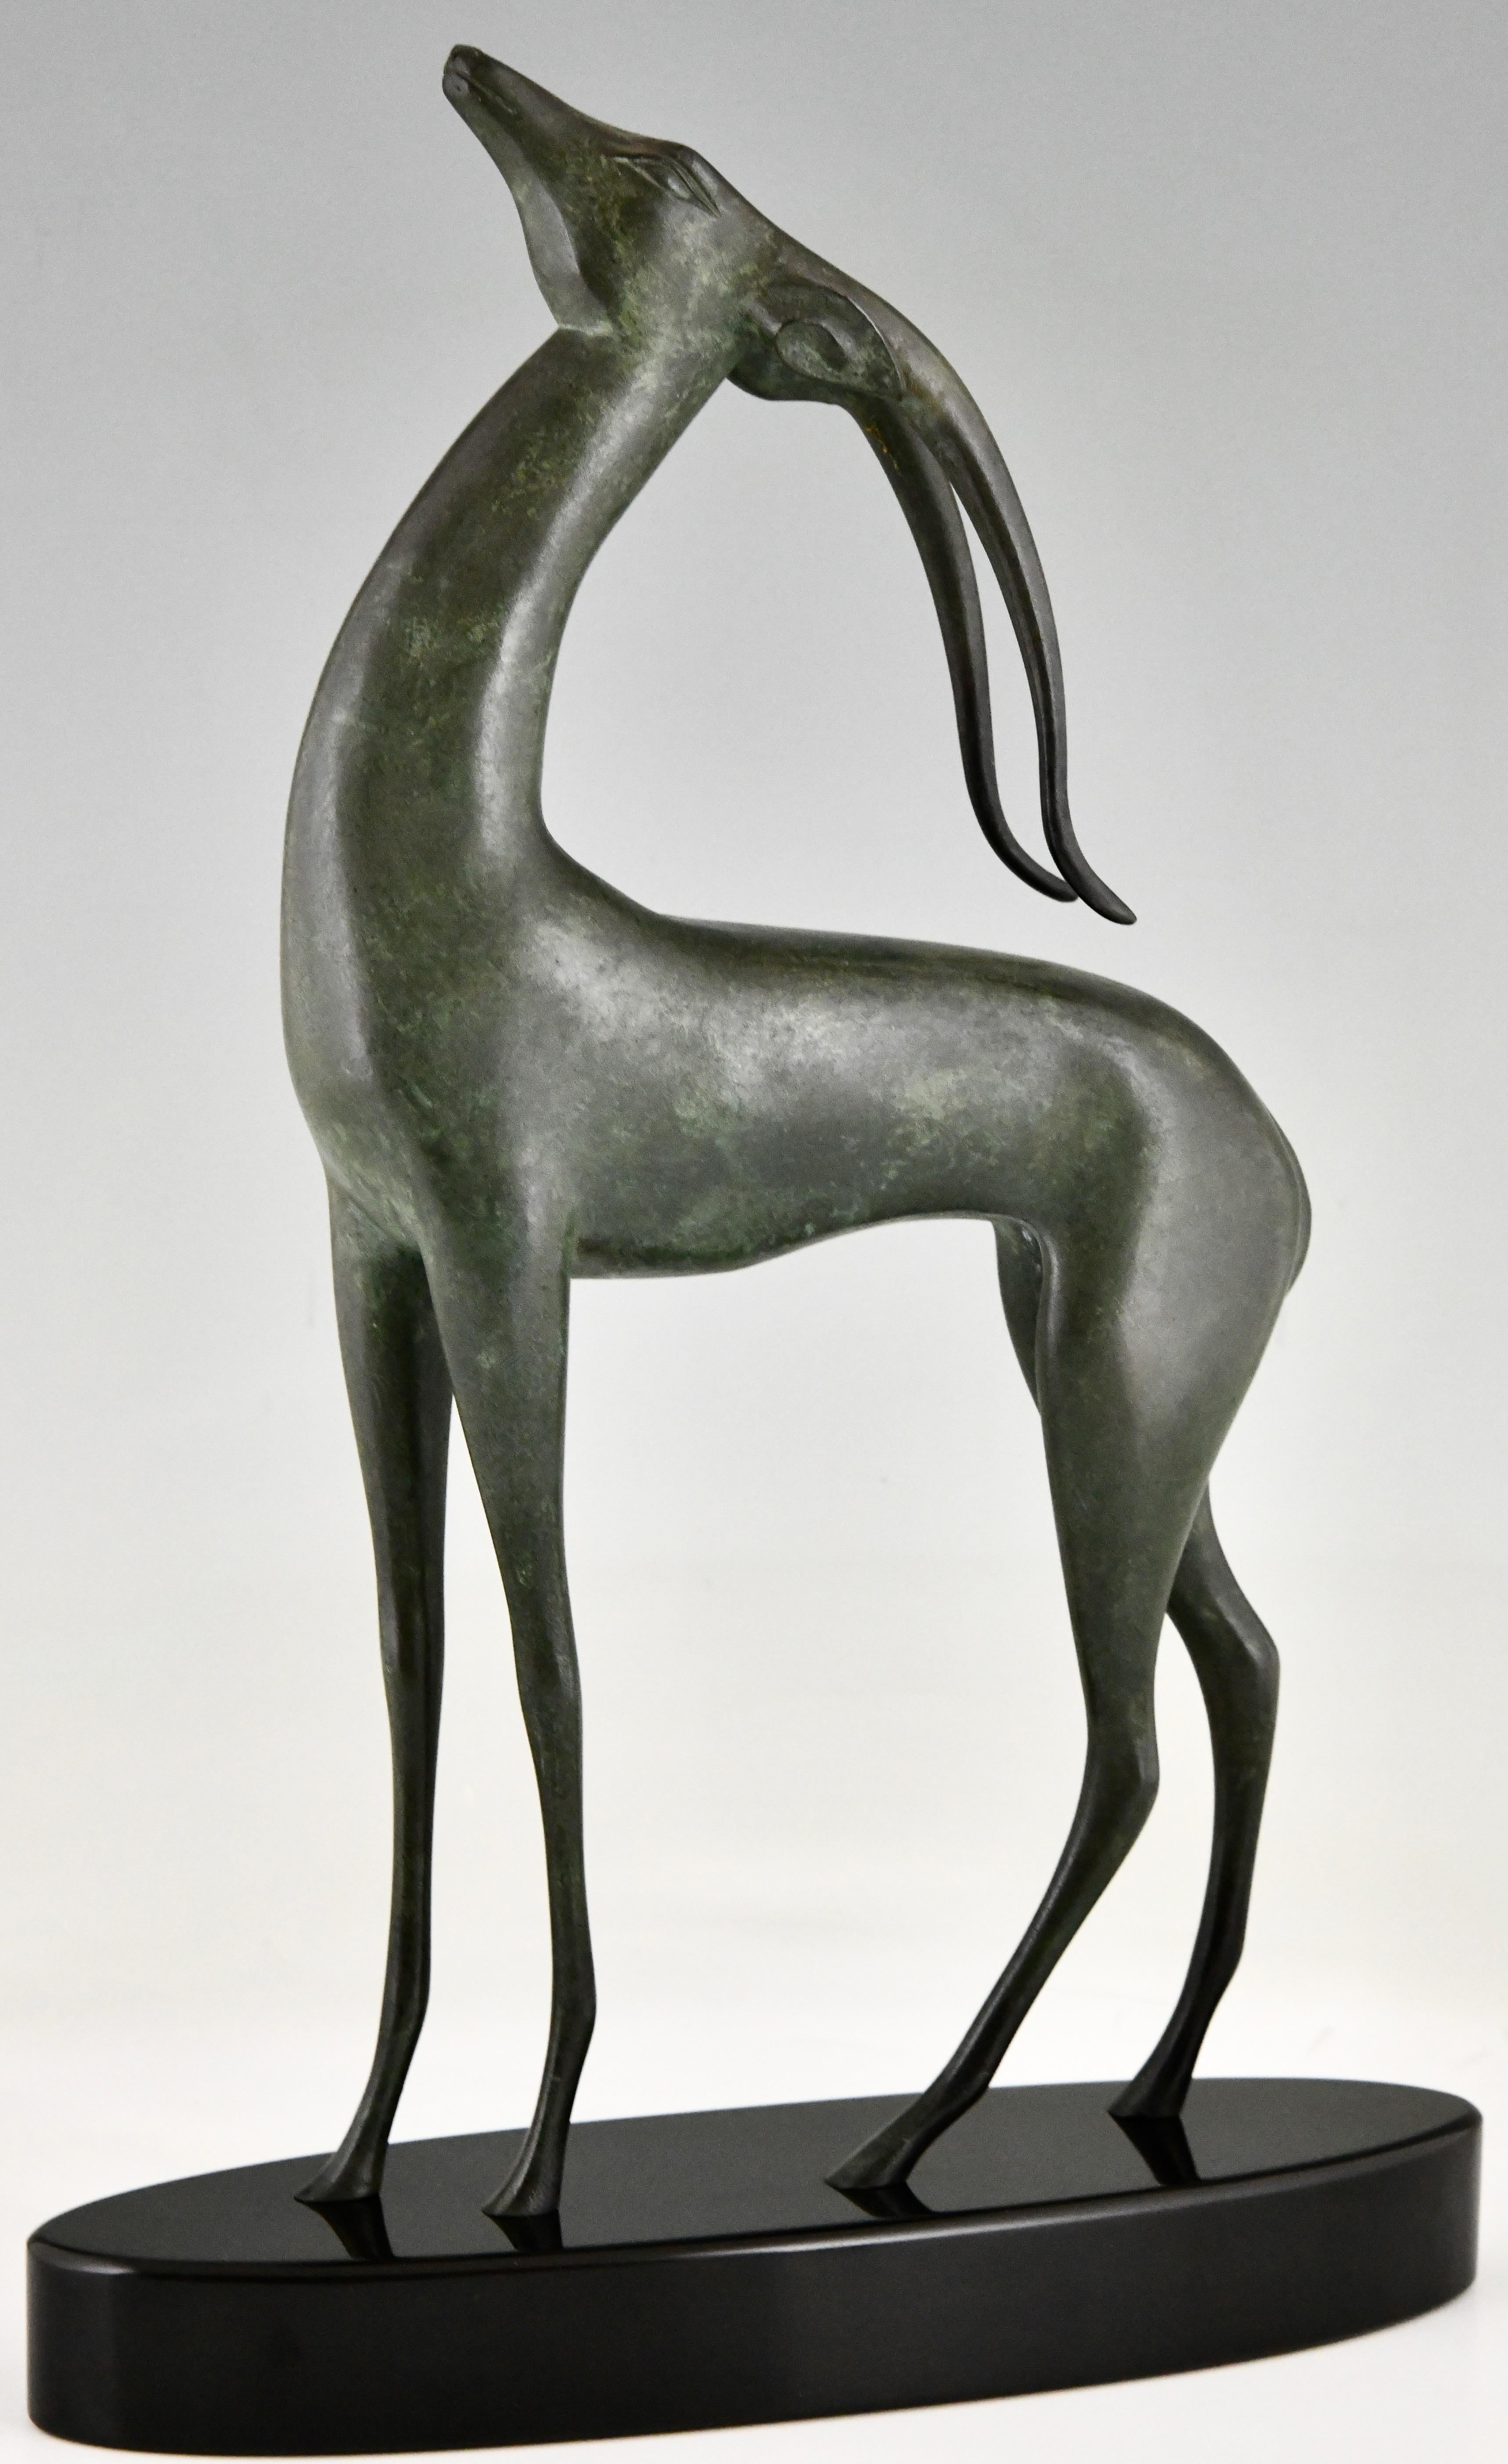 Art Deco bronze sculpture antelope by Boisnoir. 
Modernist with the foundry mark of Marcel Guillemard, marked Bronze, numbered 38.
Patinated bronze on an oval Belgian Black marble base.
France 1925.